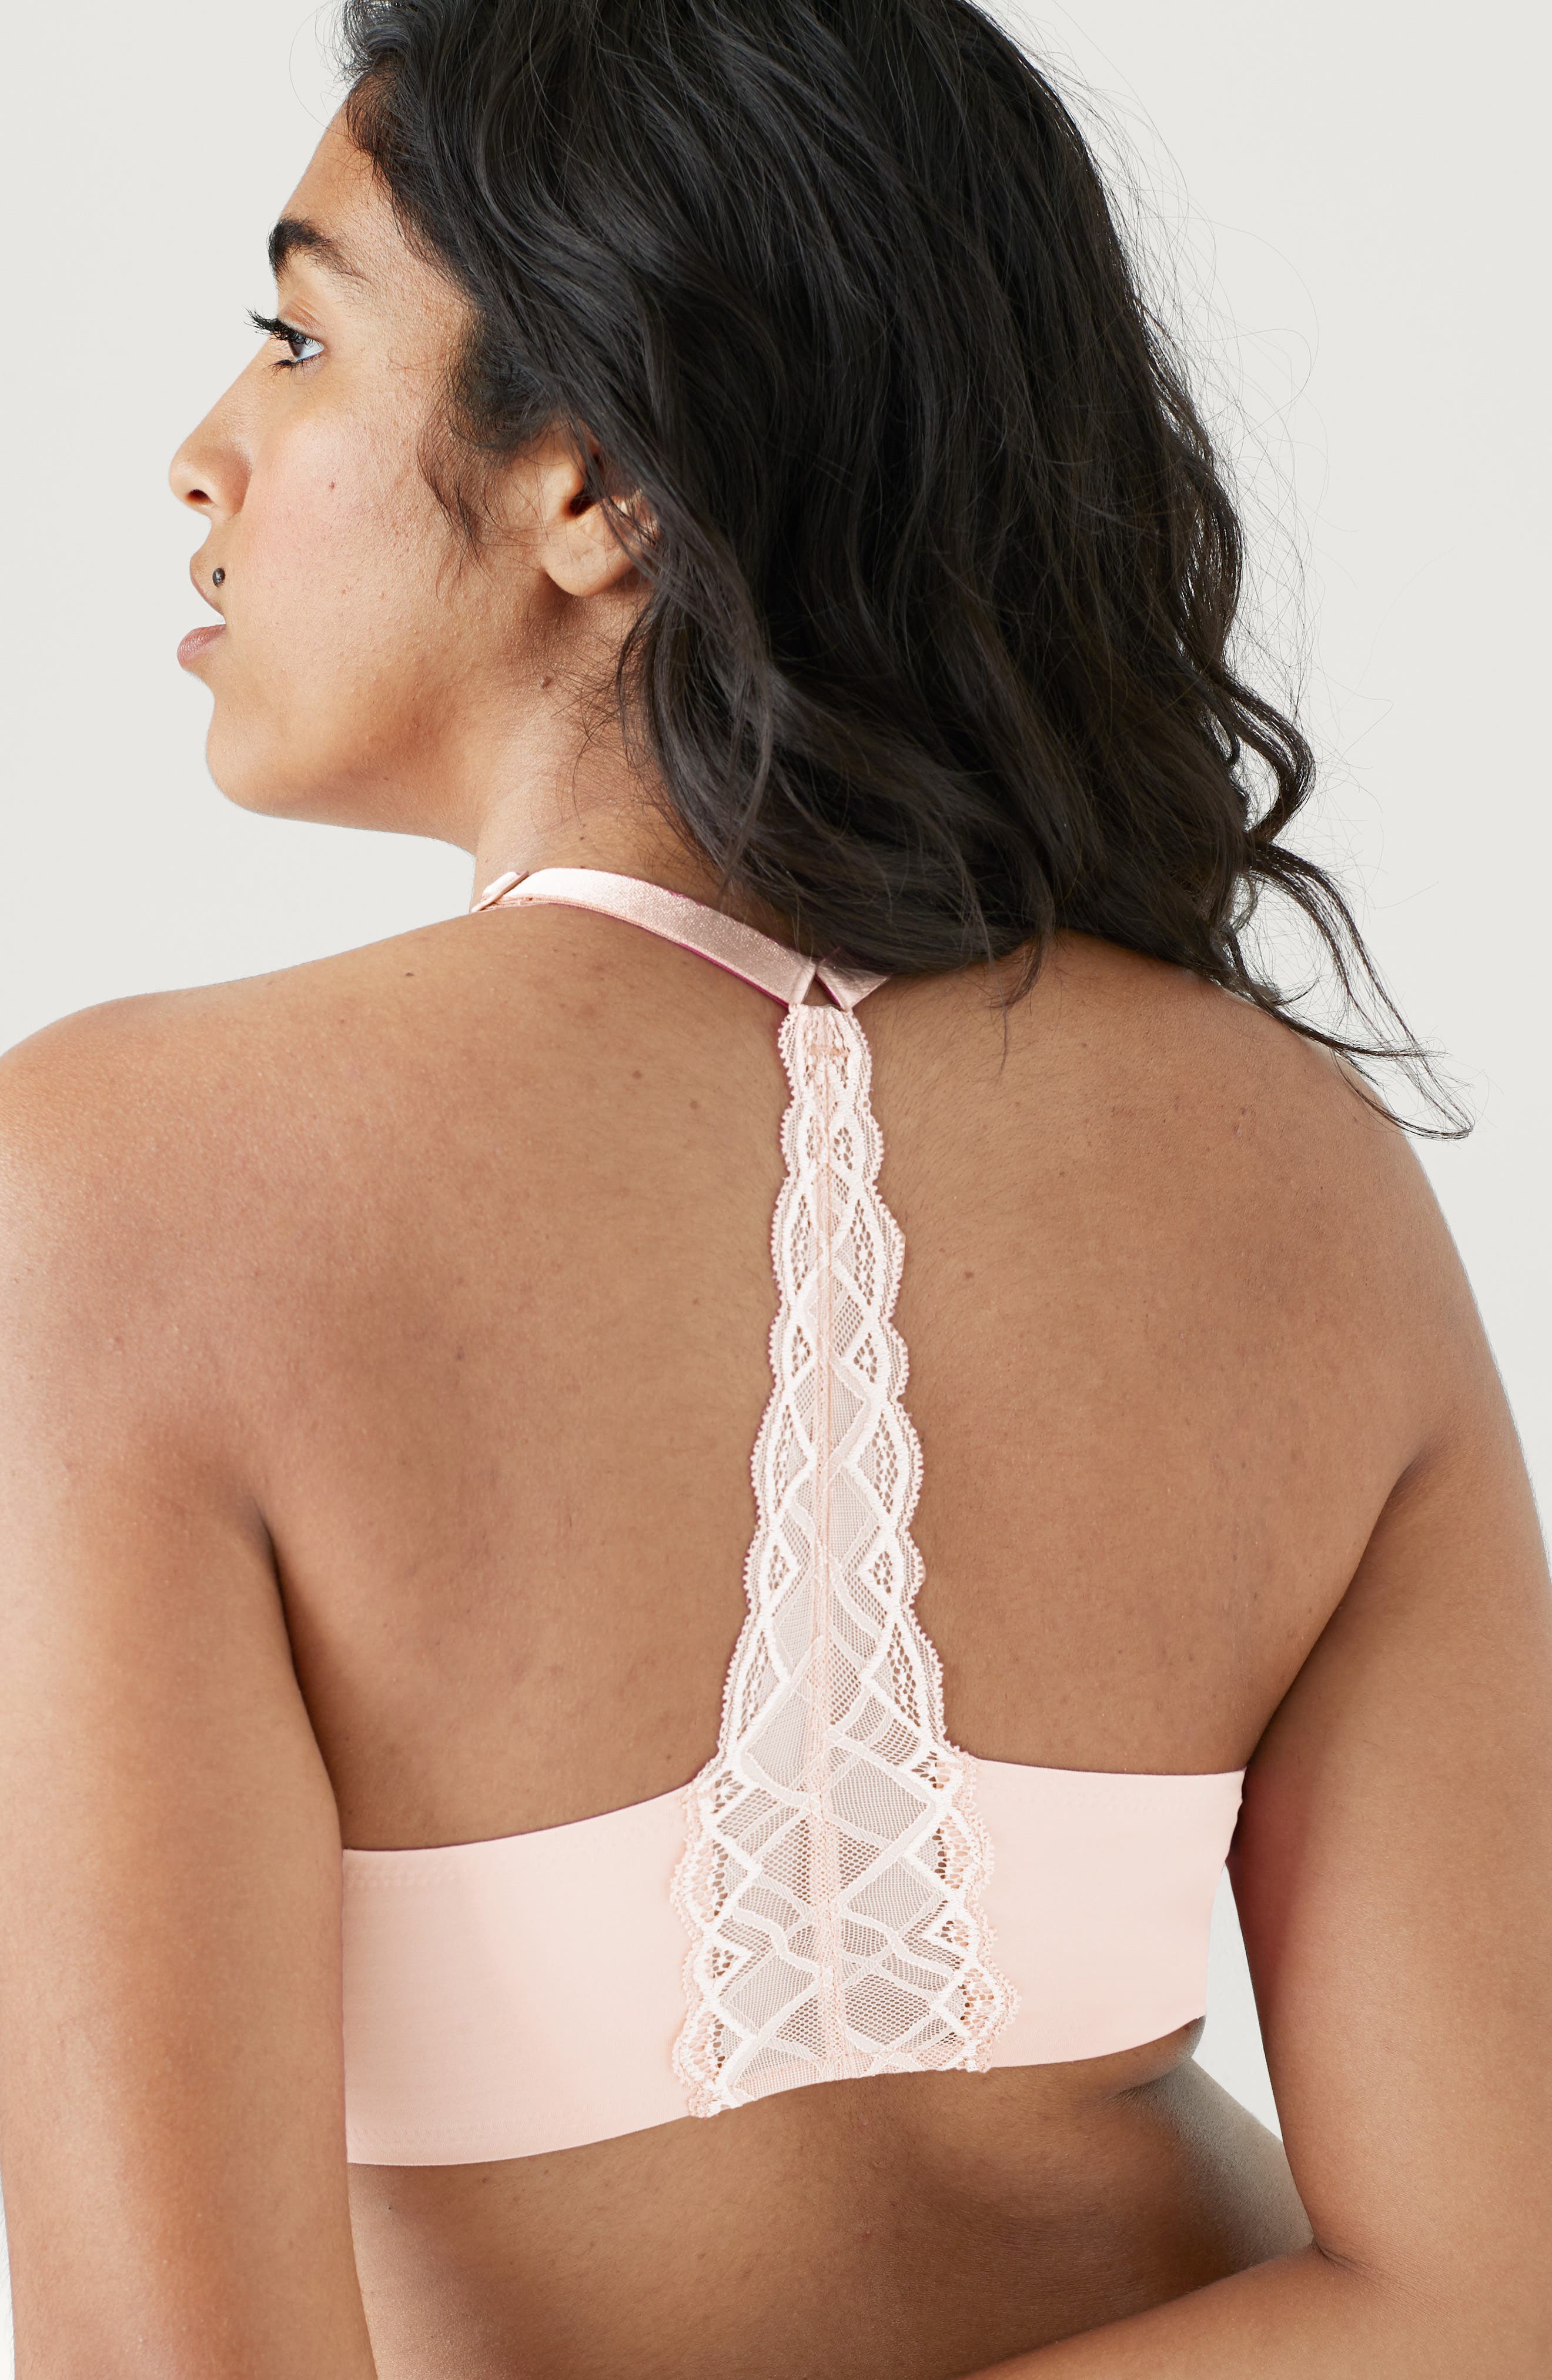 Nordstrom Anniversary Sale: Shoppers call $30 bralette 'the